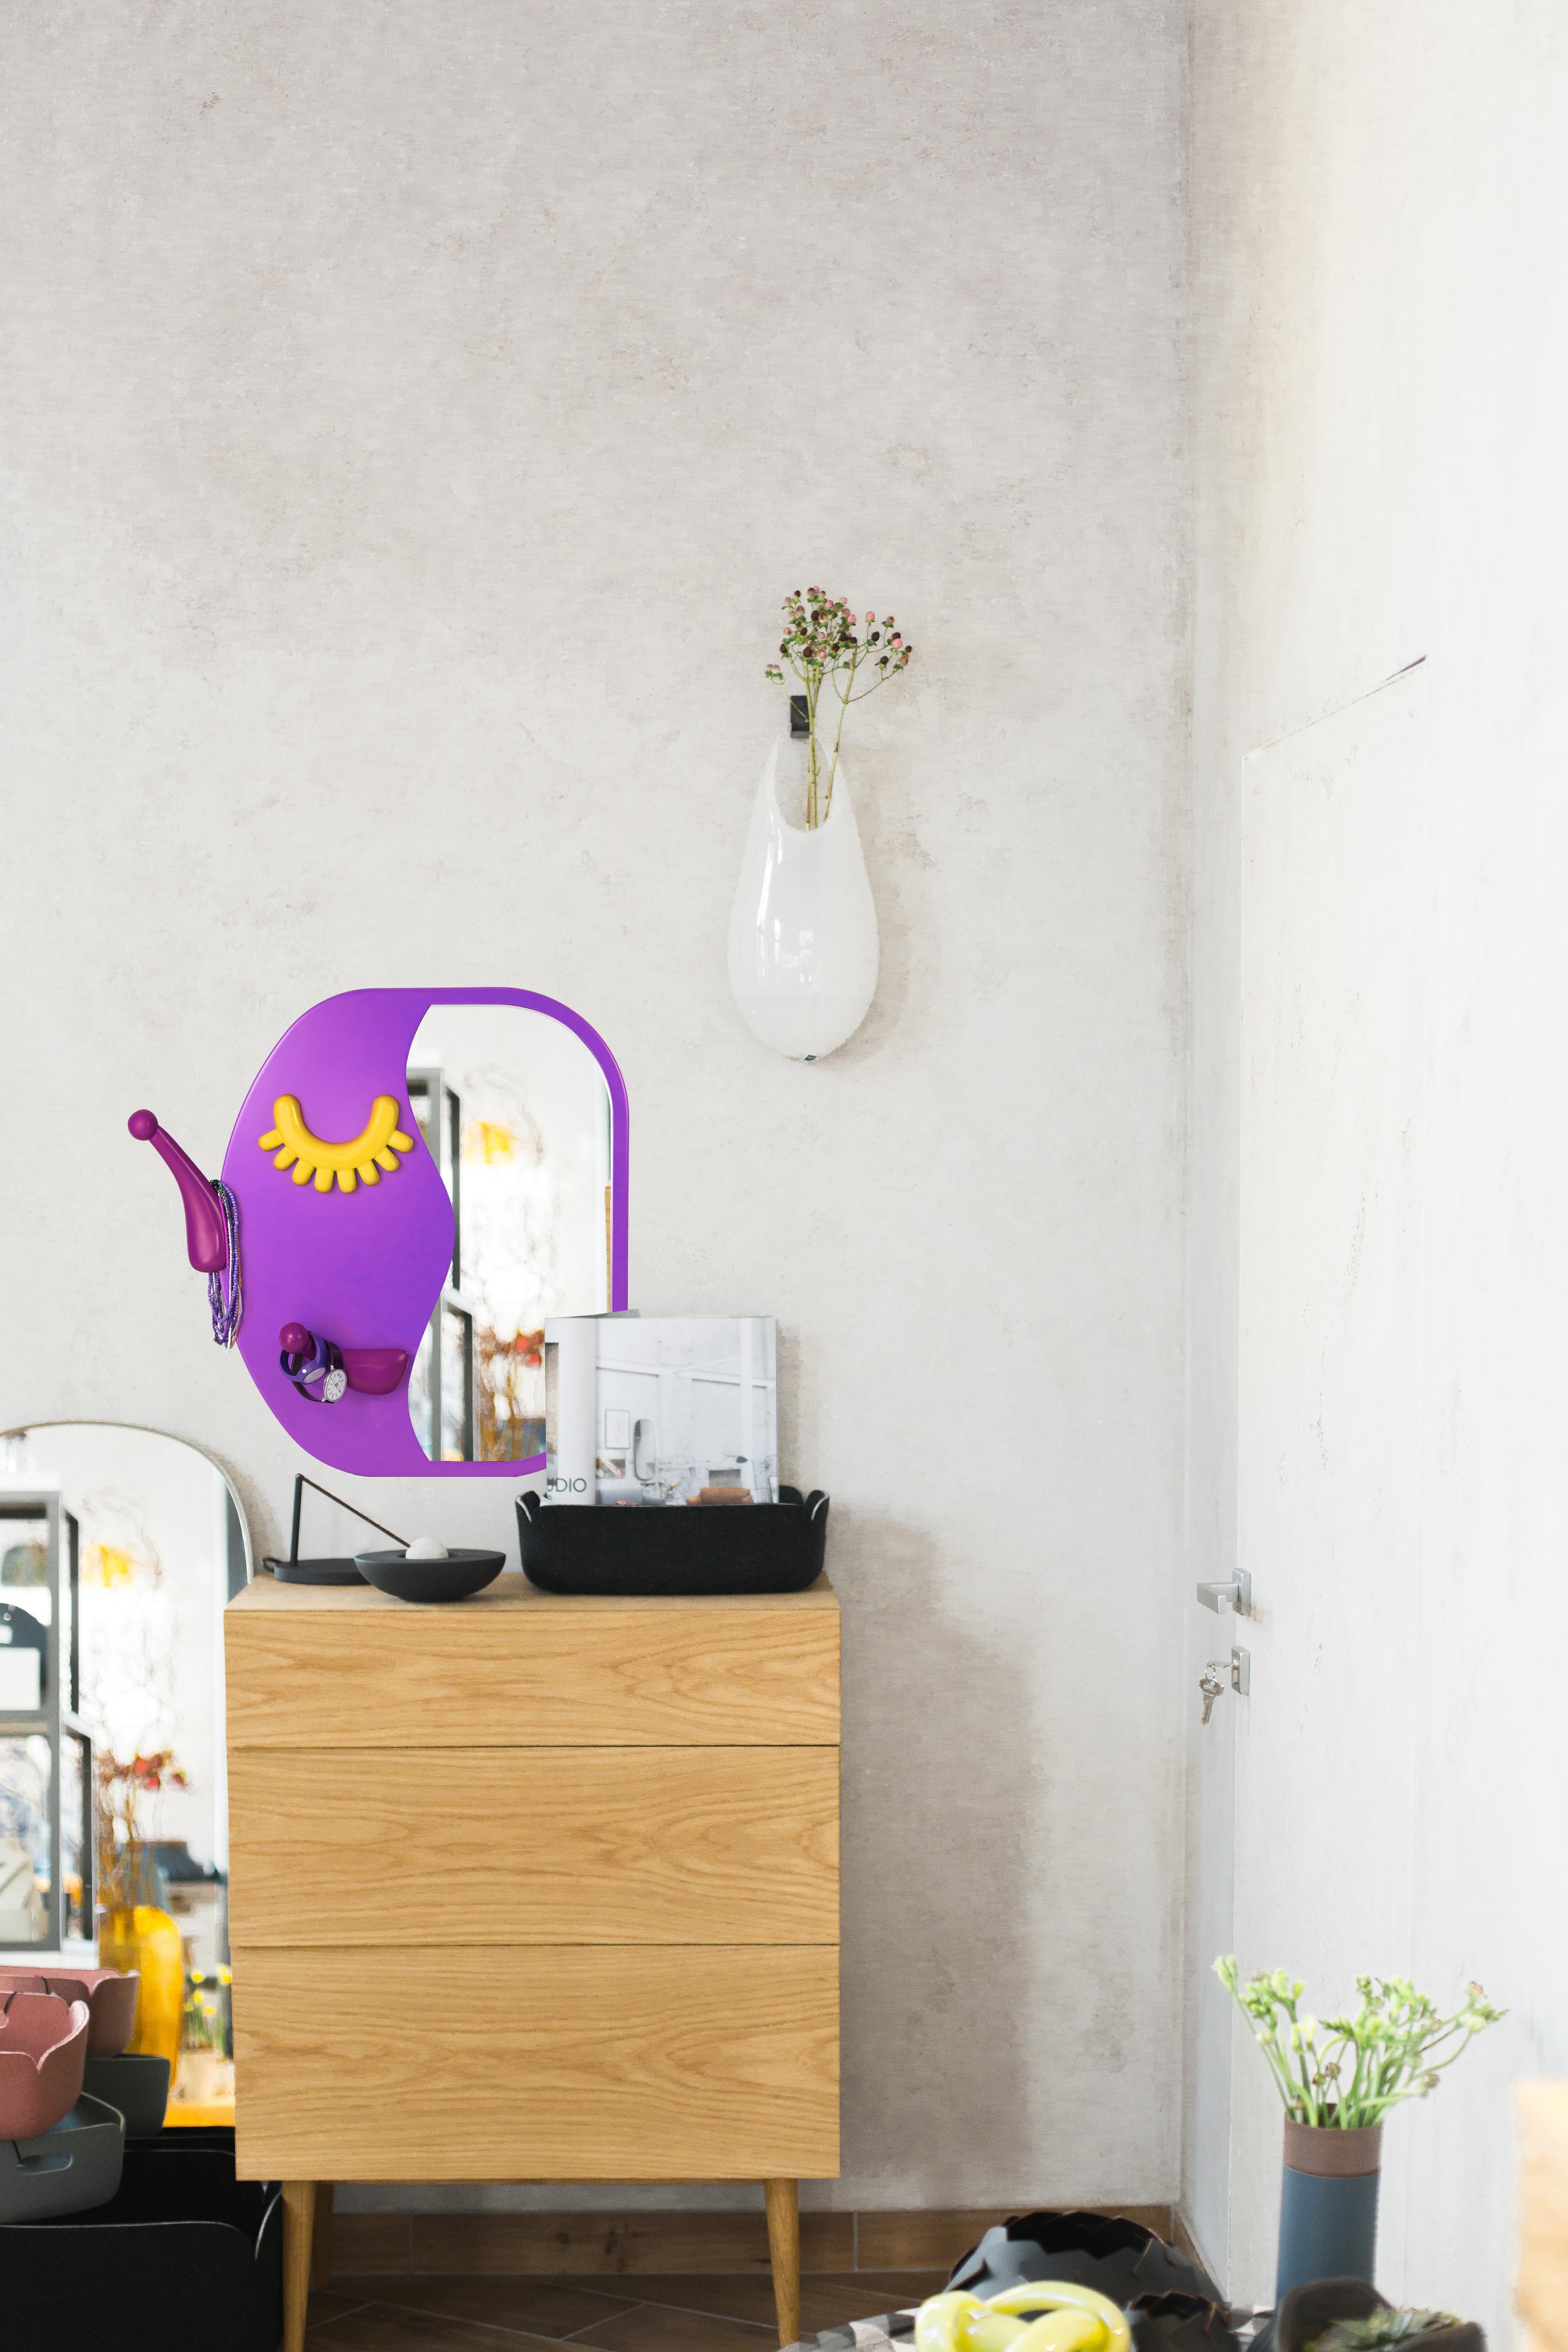 Overview:
Brighten up your daily routine with the Face to Face S Wall Mirror, a delightful combination of functionality and whimsical design. This piece not only offers a full-length reflection but also includes a hanger for convenient dressing, all